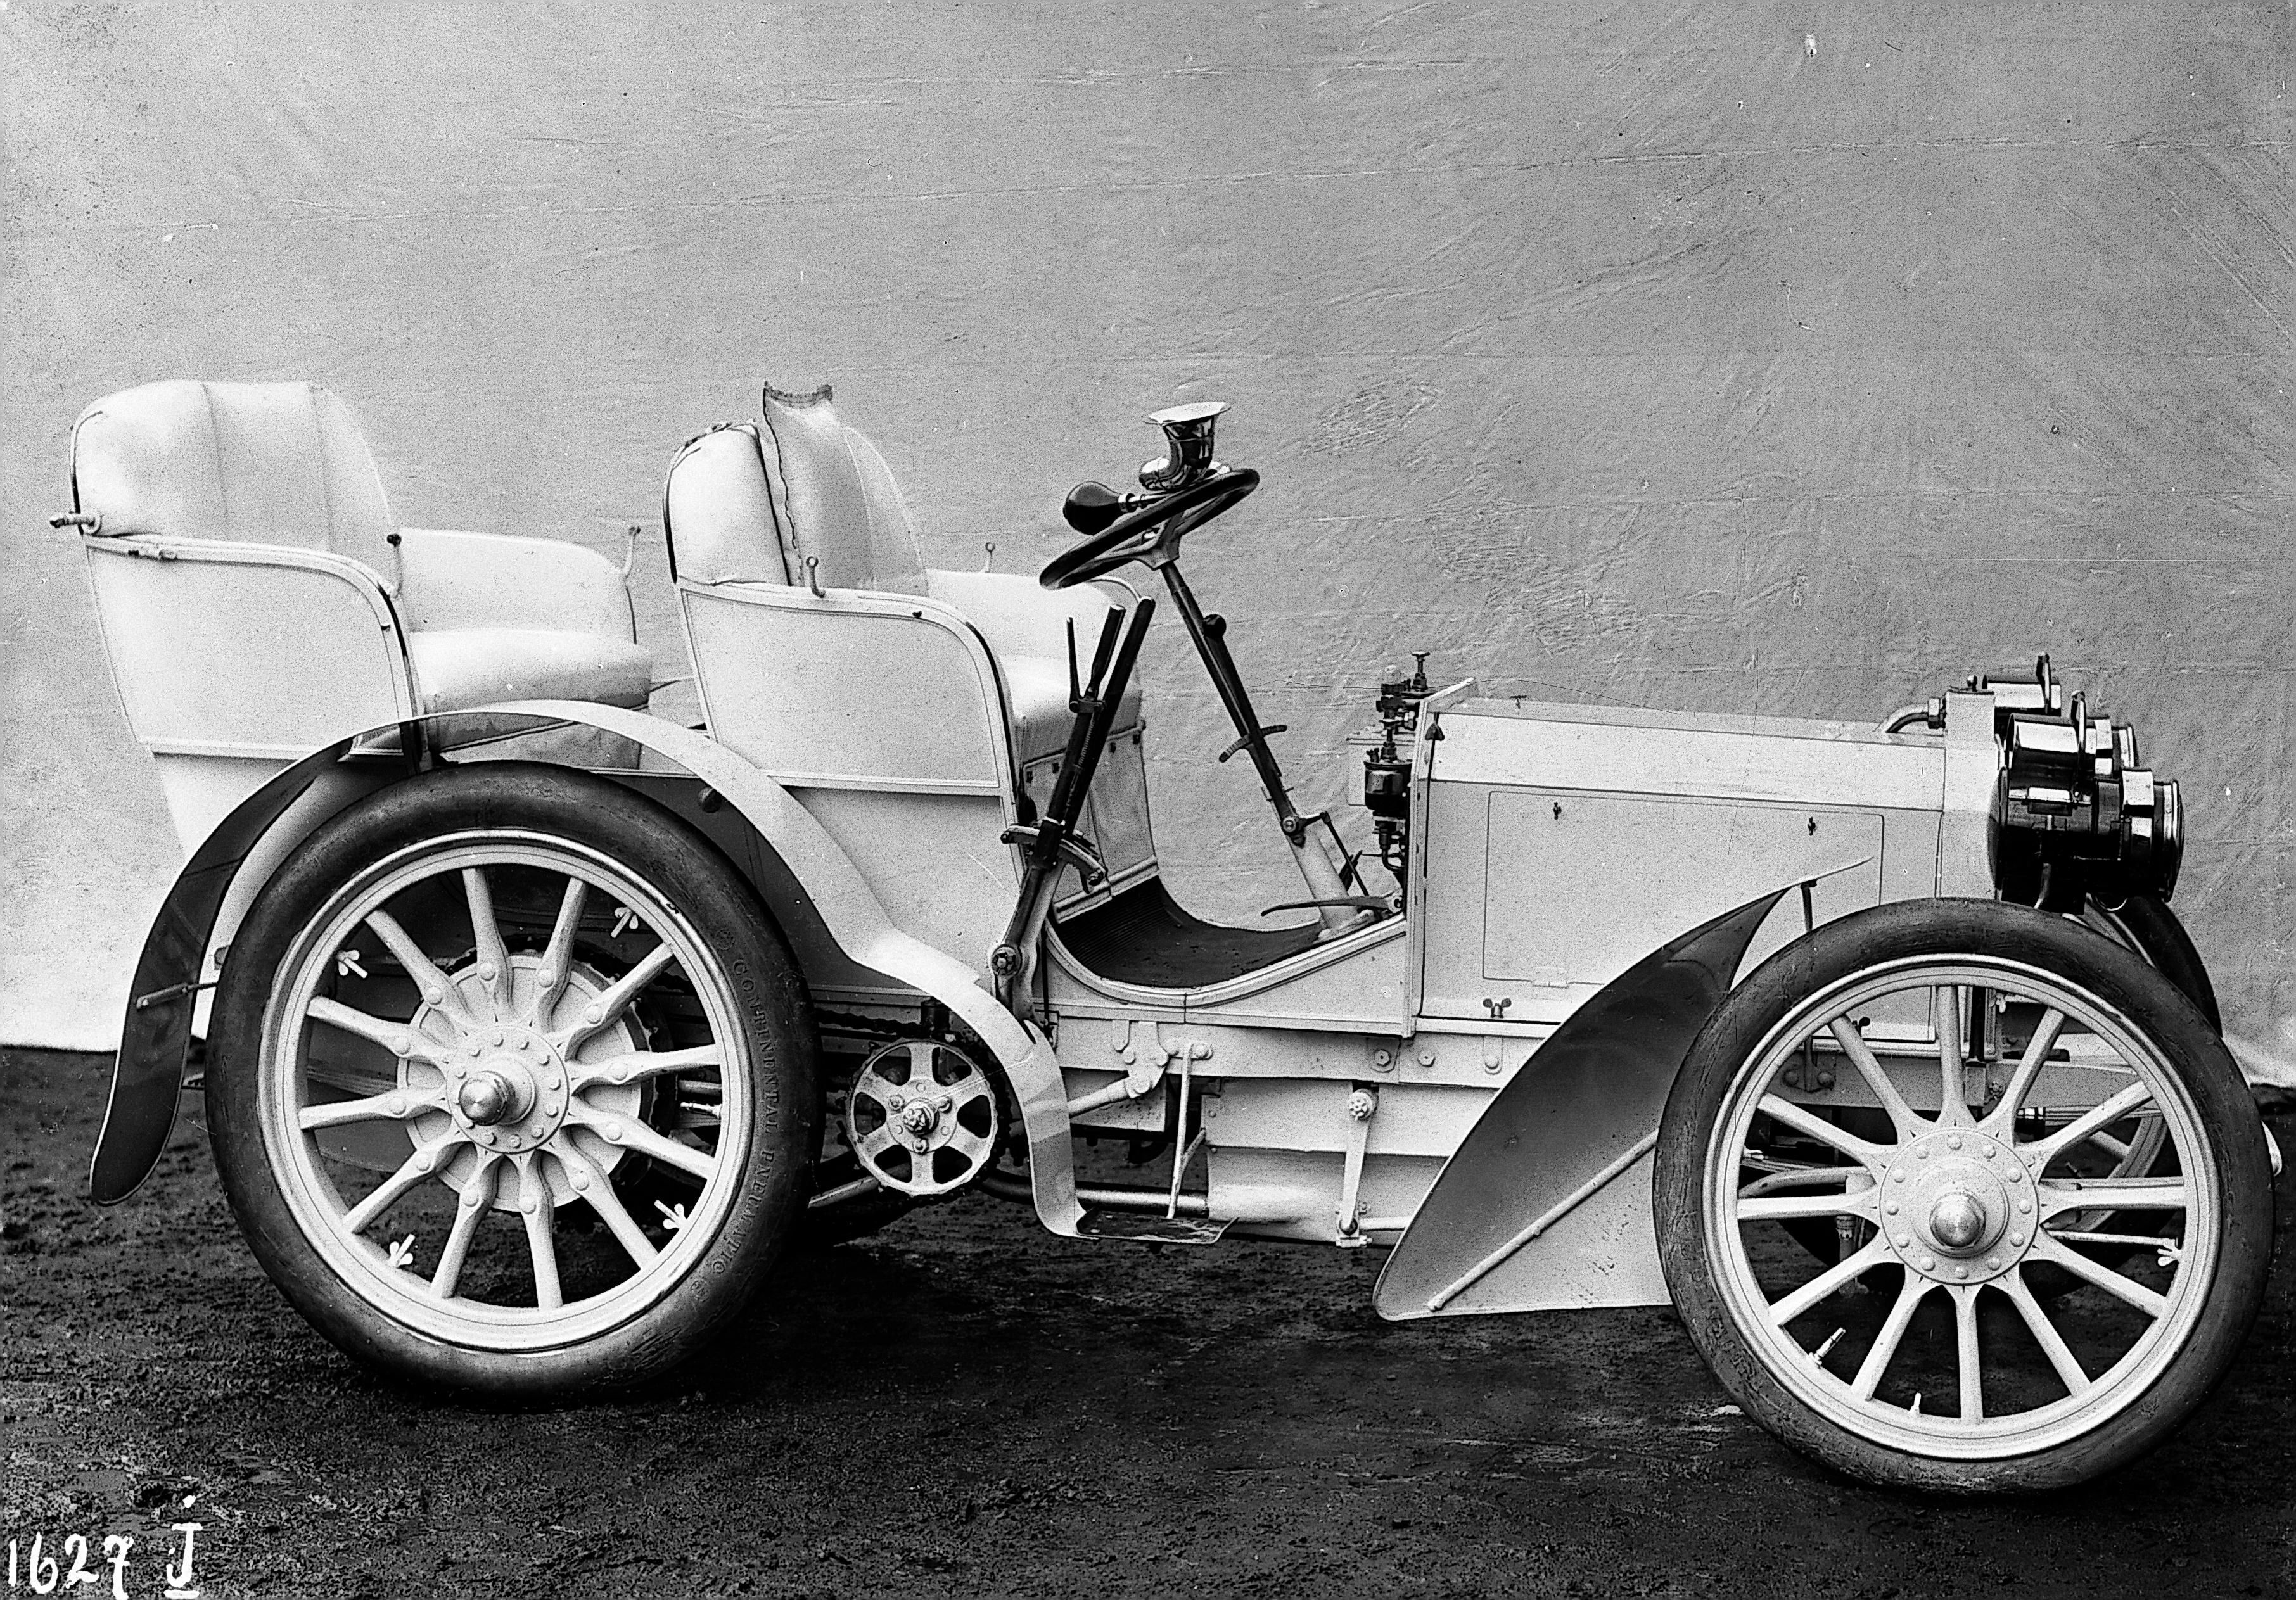 Benz 35 side view, First modern automobile